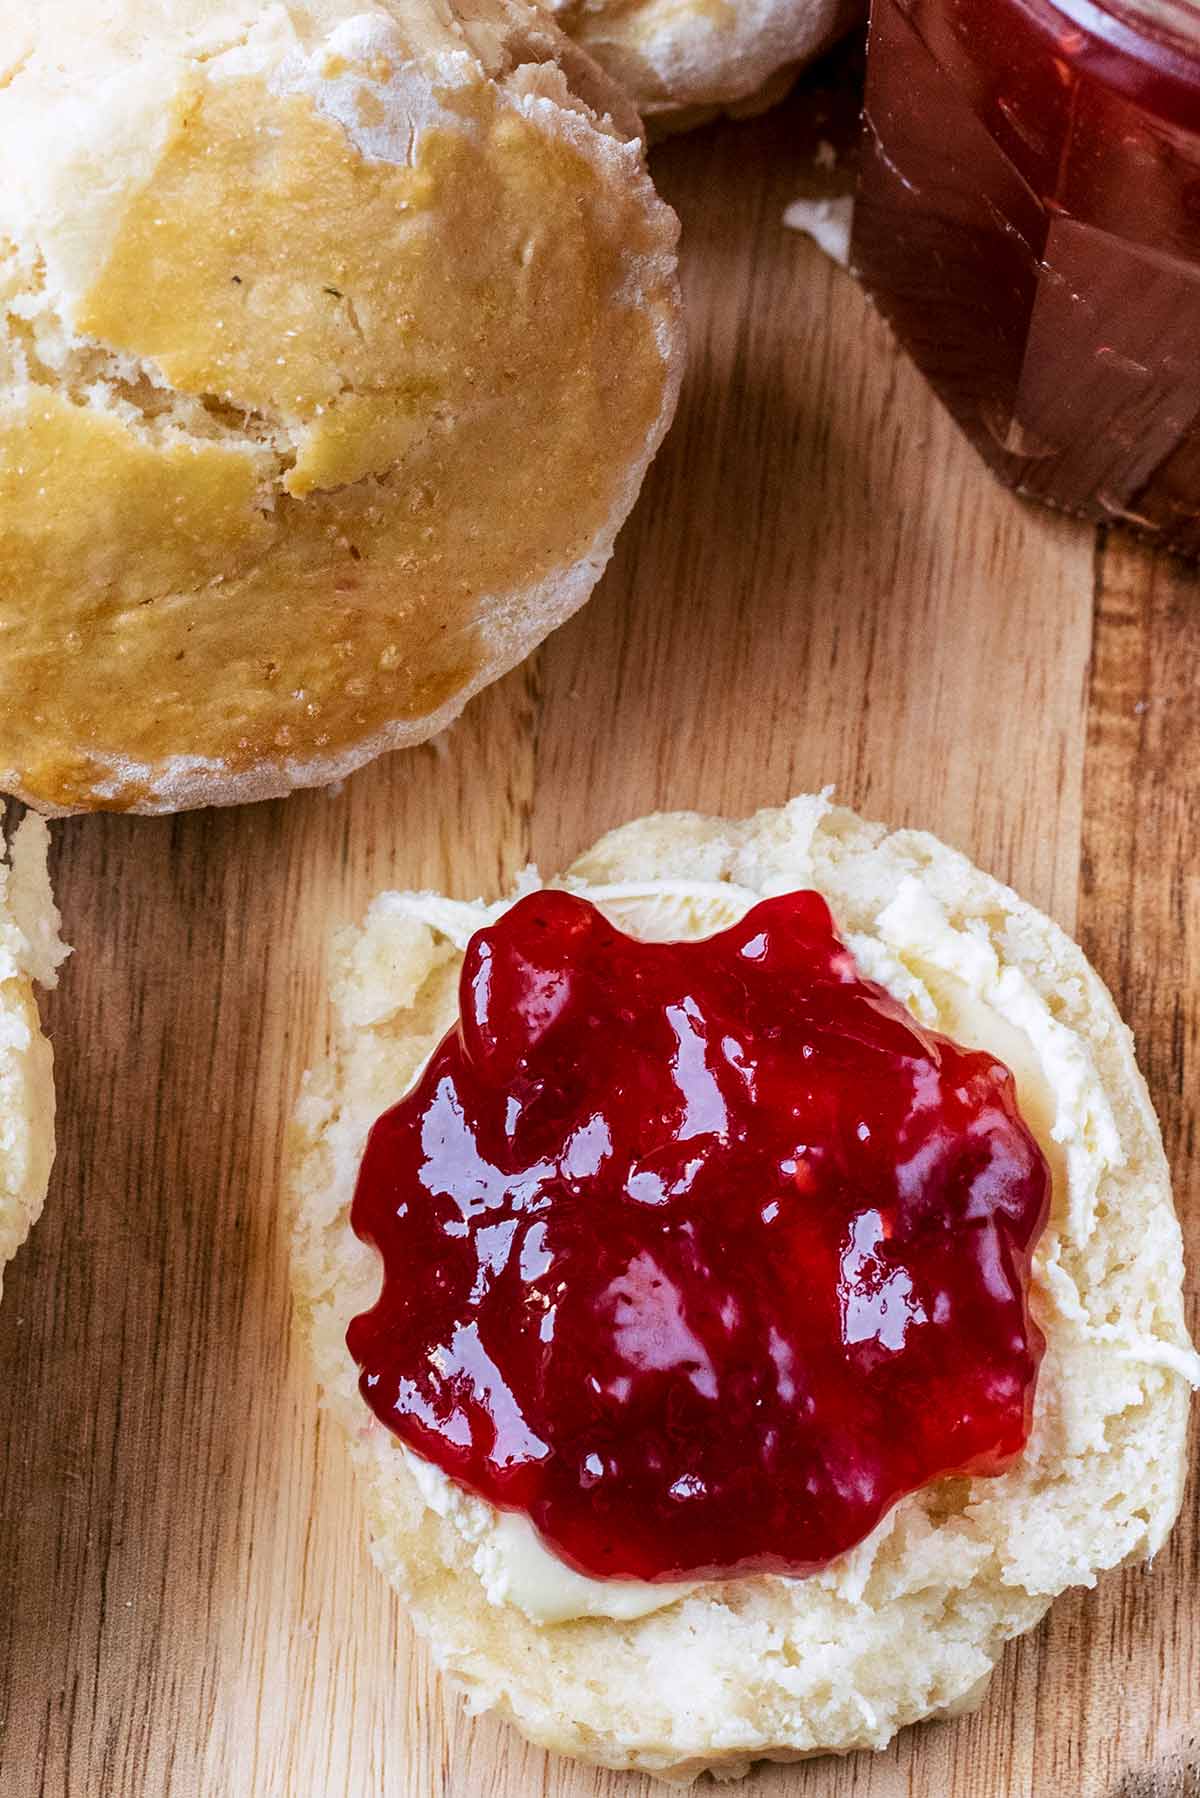 A scone topped with clotted cream and raspberry jam.